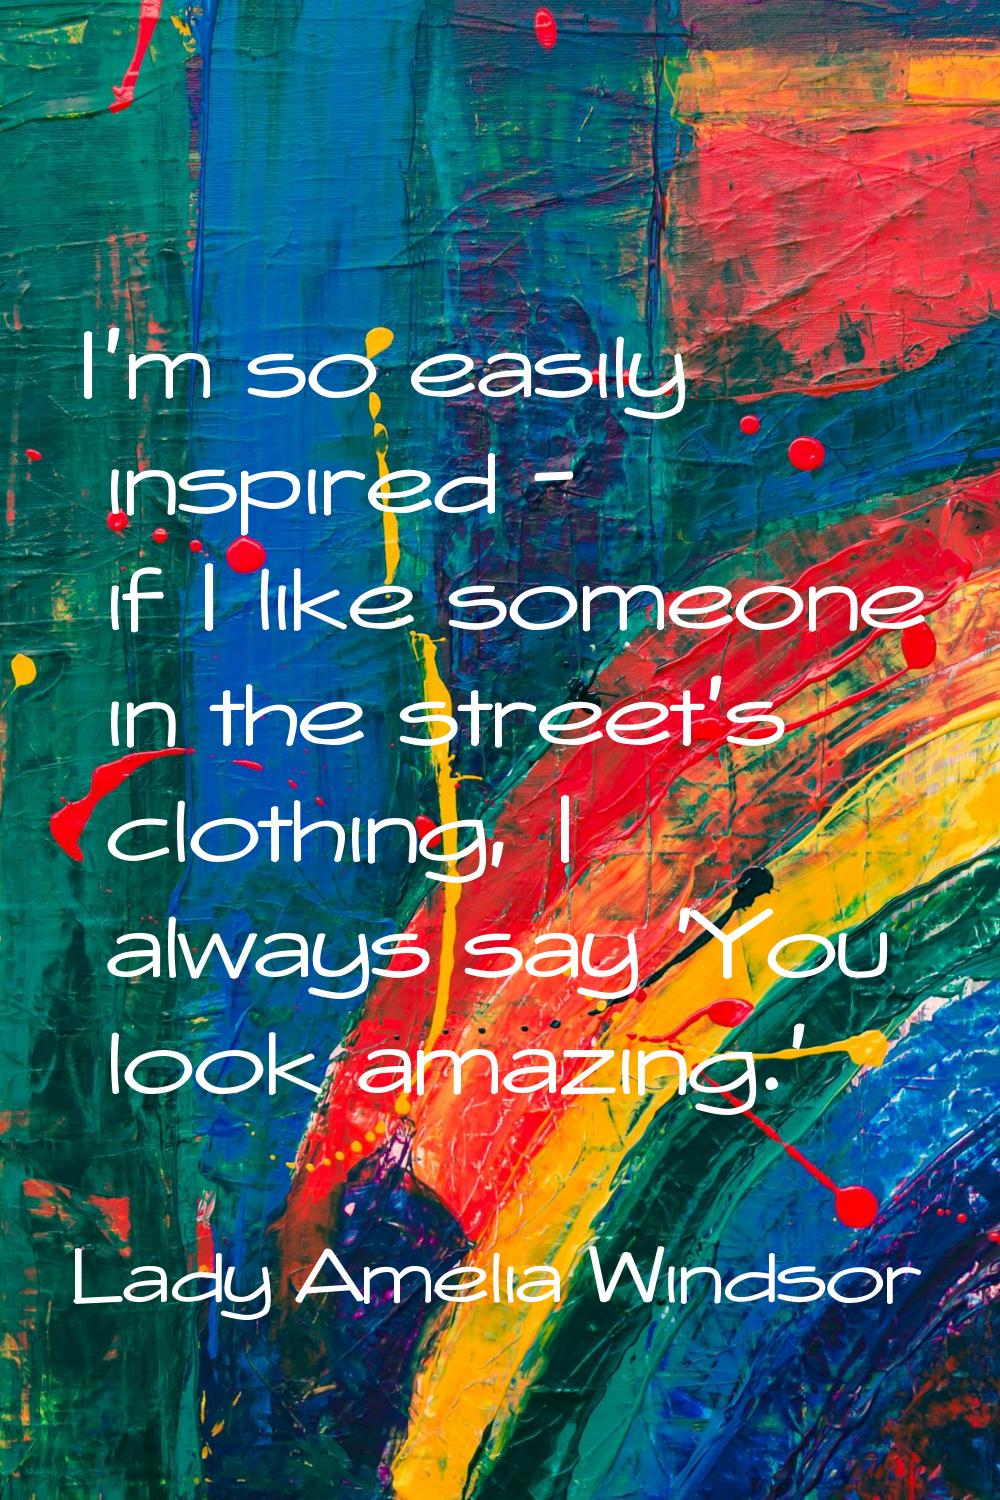 I'm so easily inspired - if I like someone in the street's clothing, I always say 'You look amazing